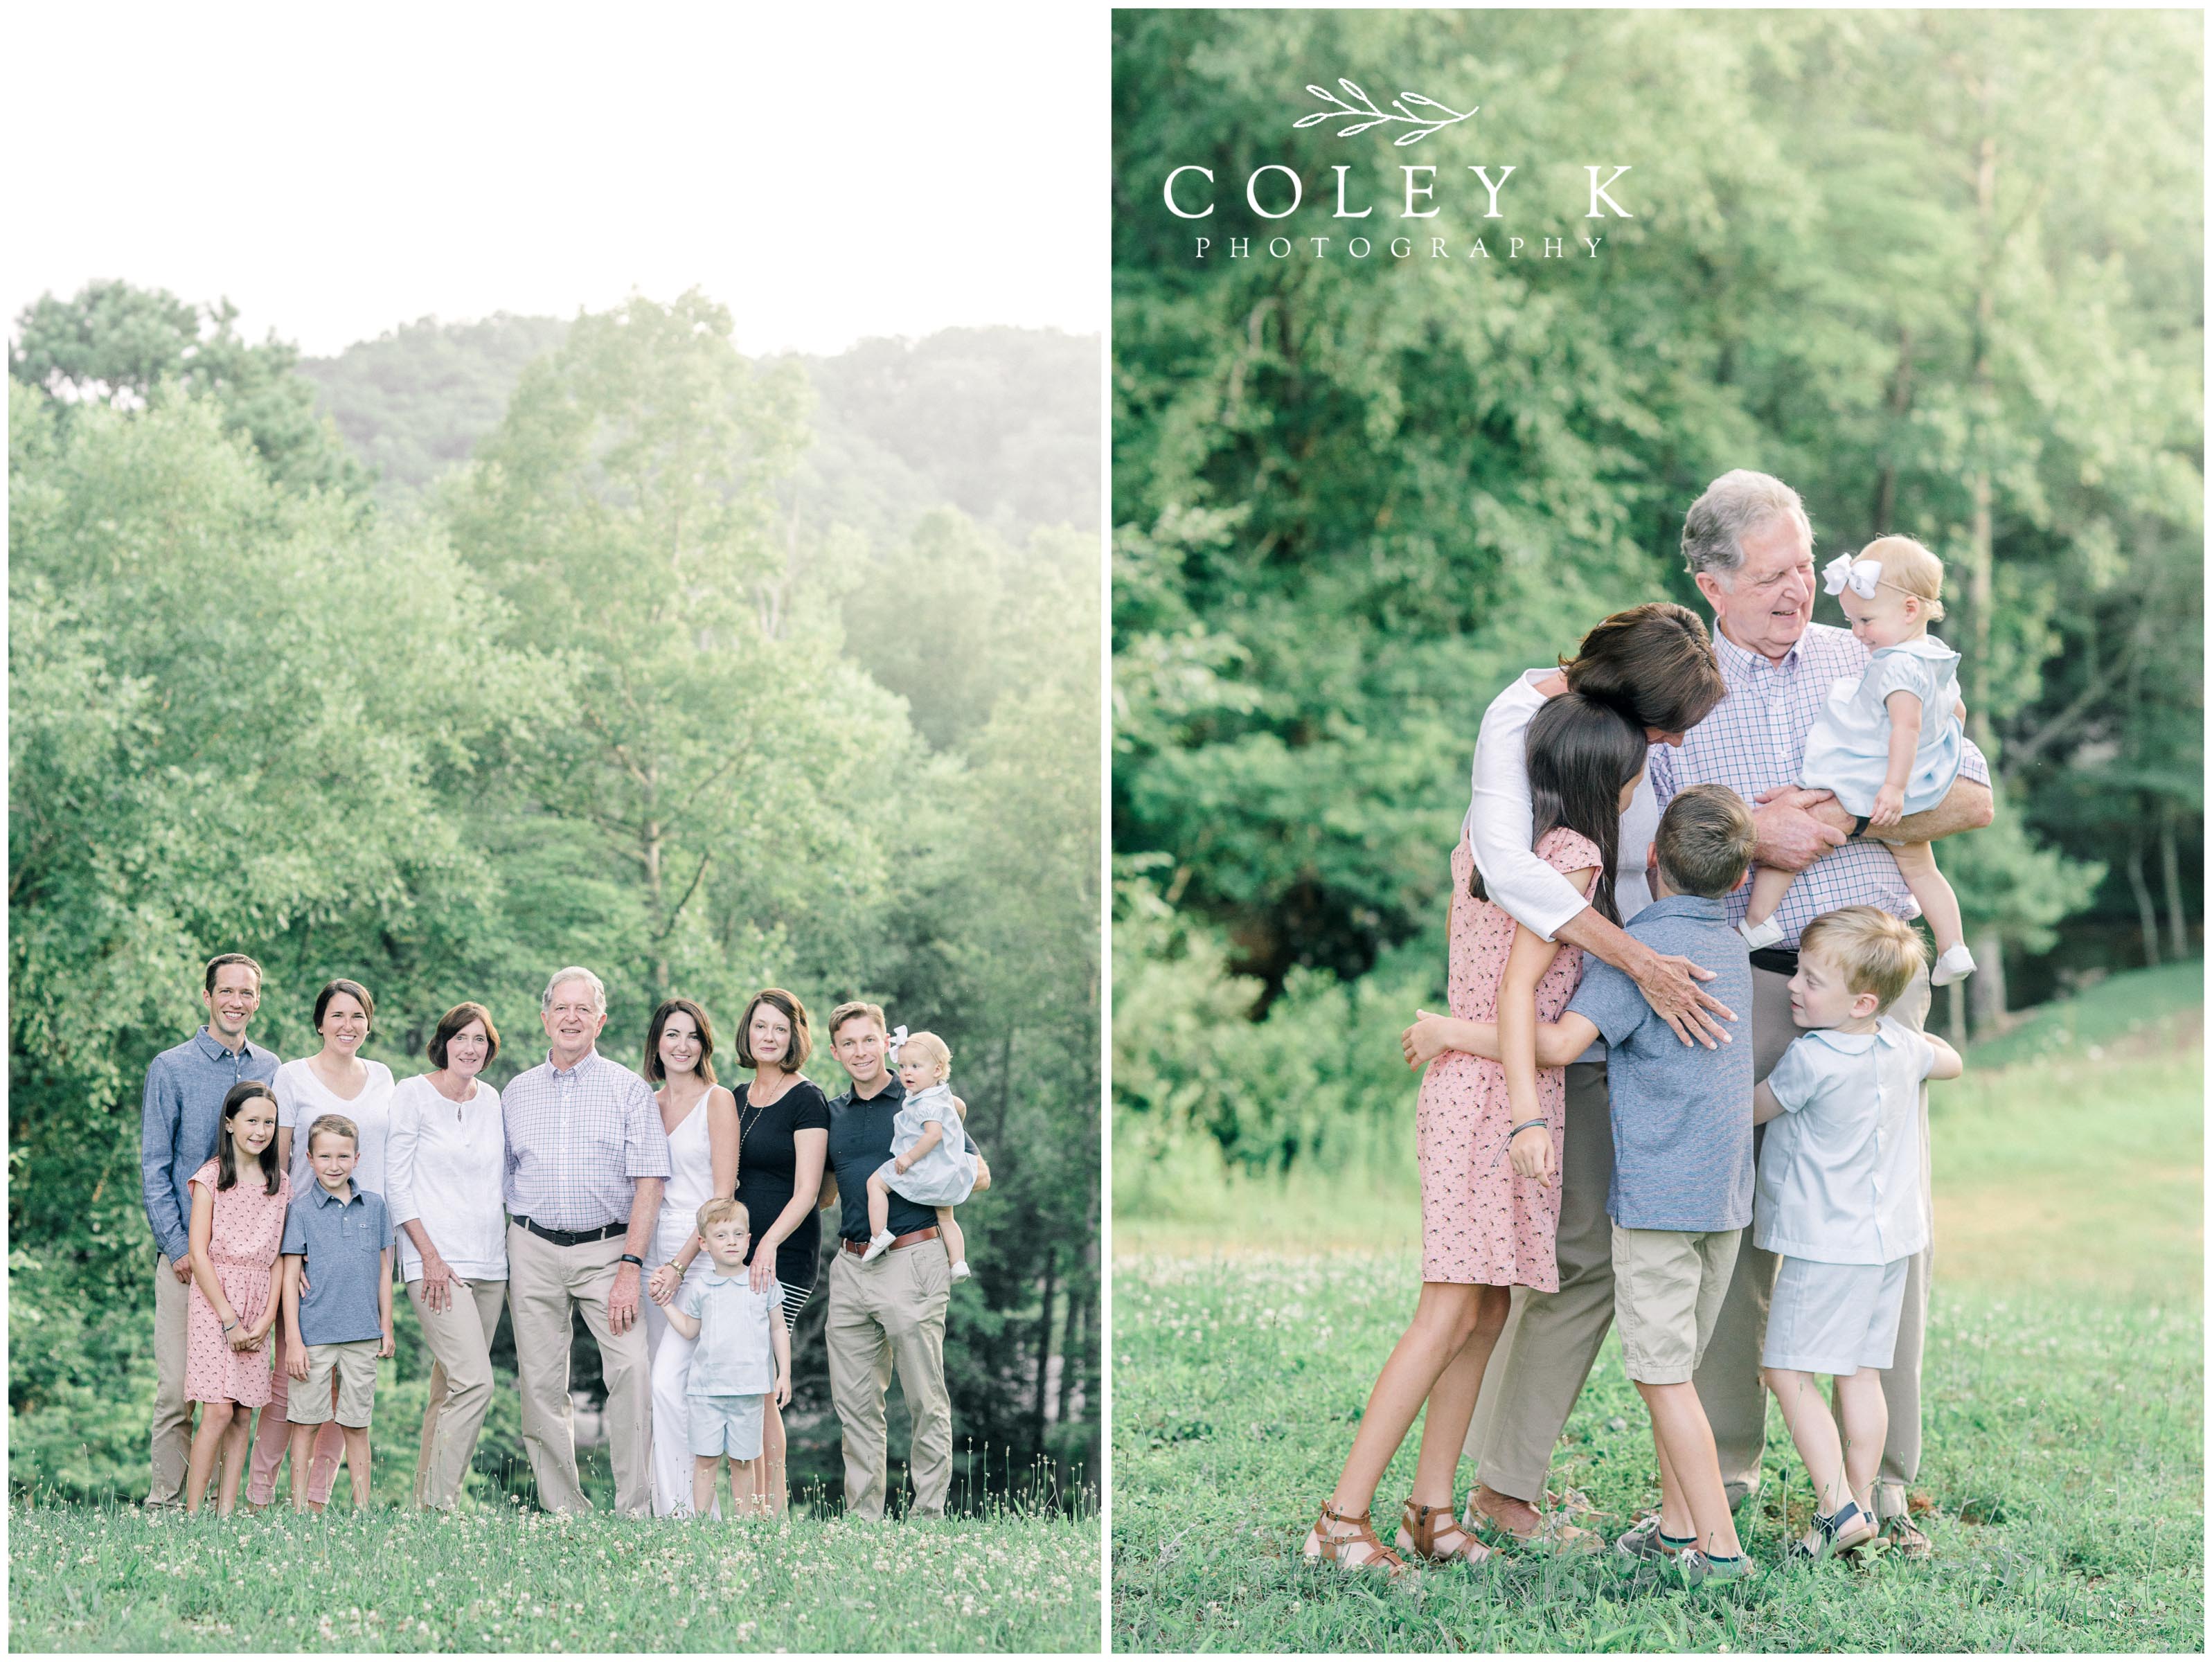 Extended Family Photos with Grandparents and Grandkids